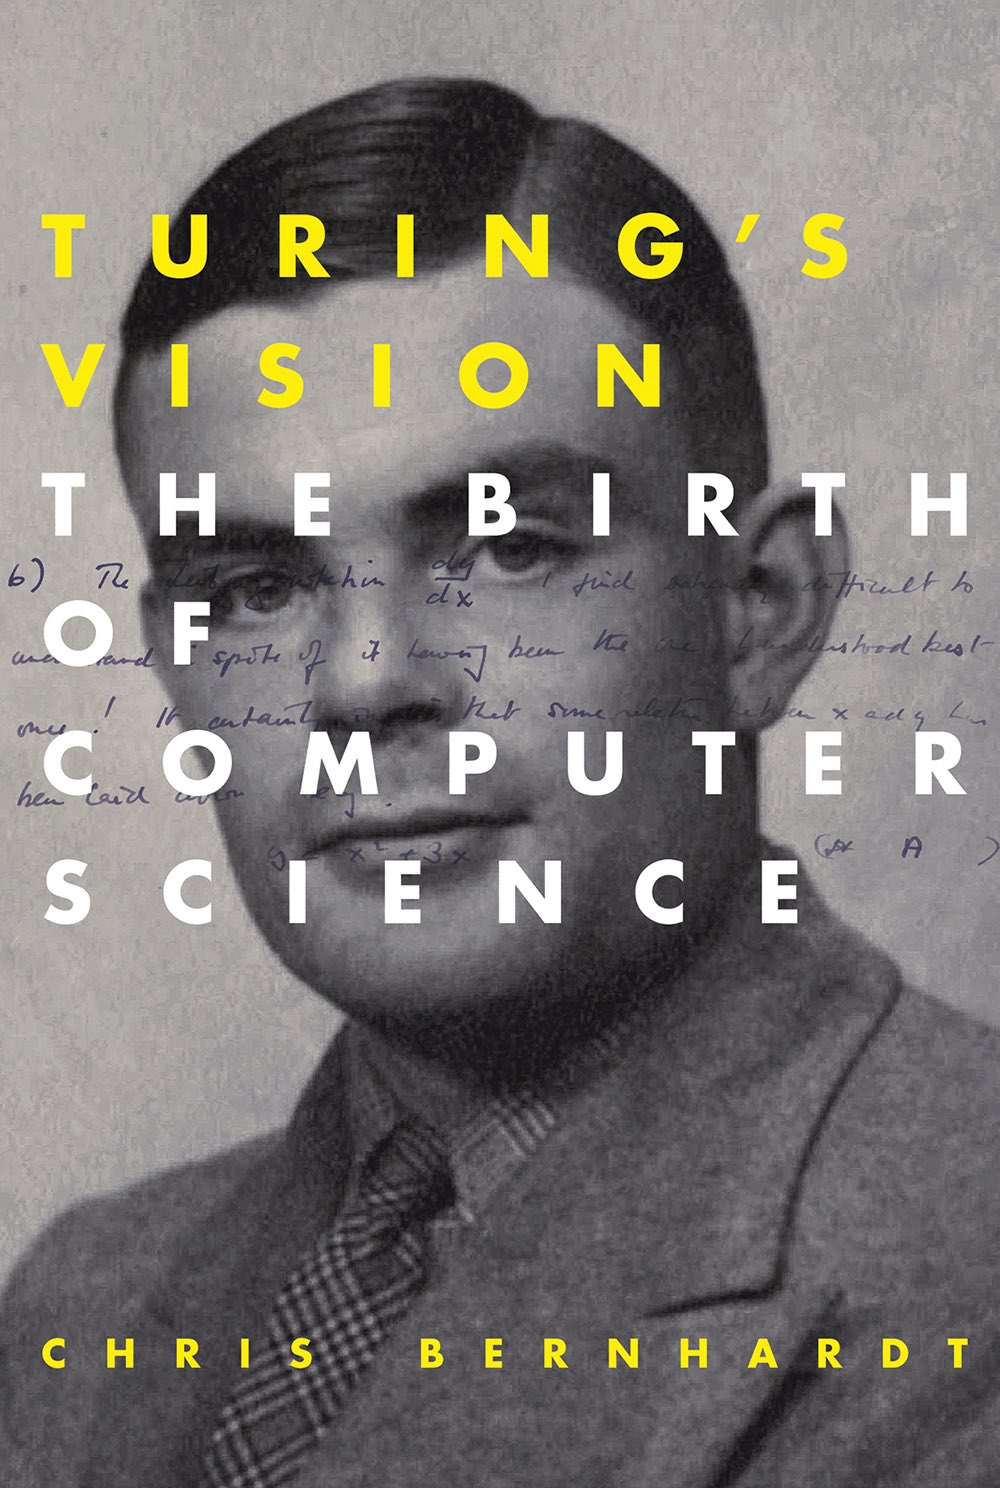 The Father of Computer Science